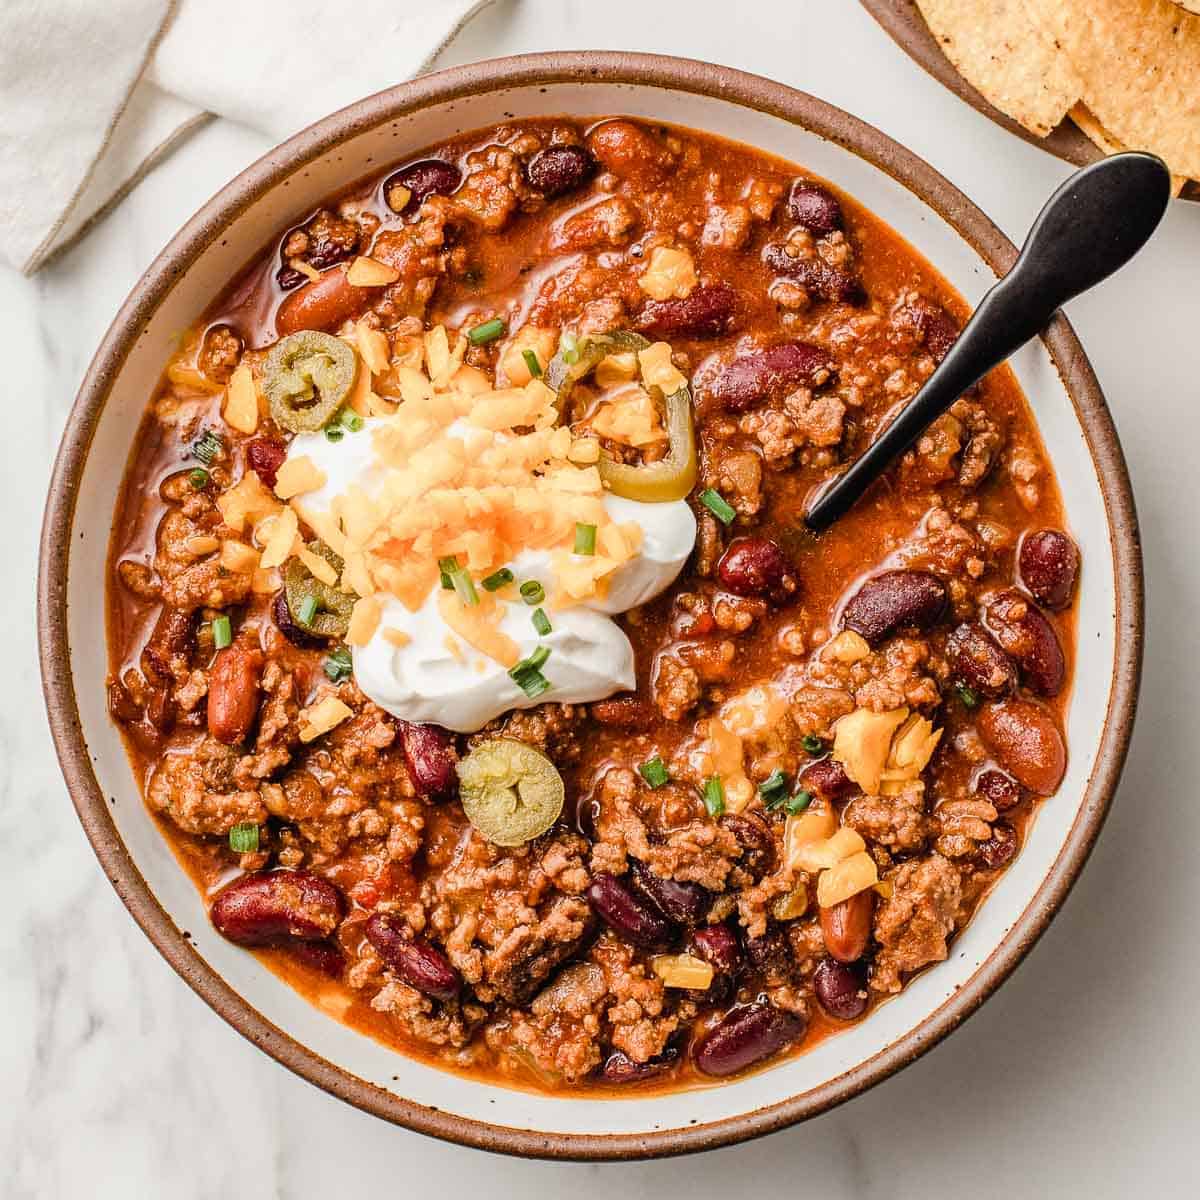 Slow cooker chili in a bowl with toppings.